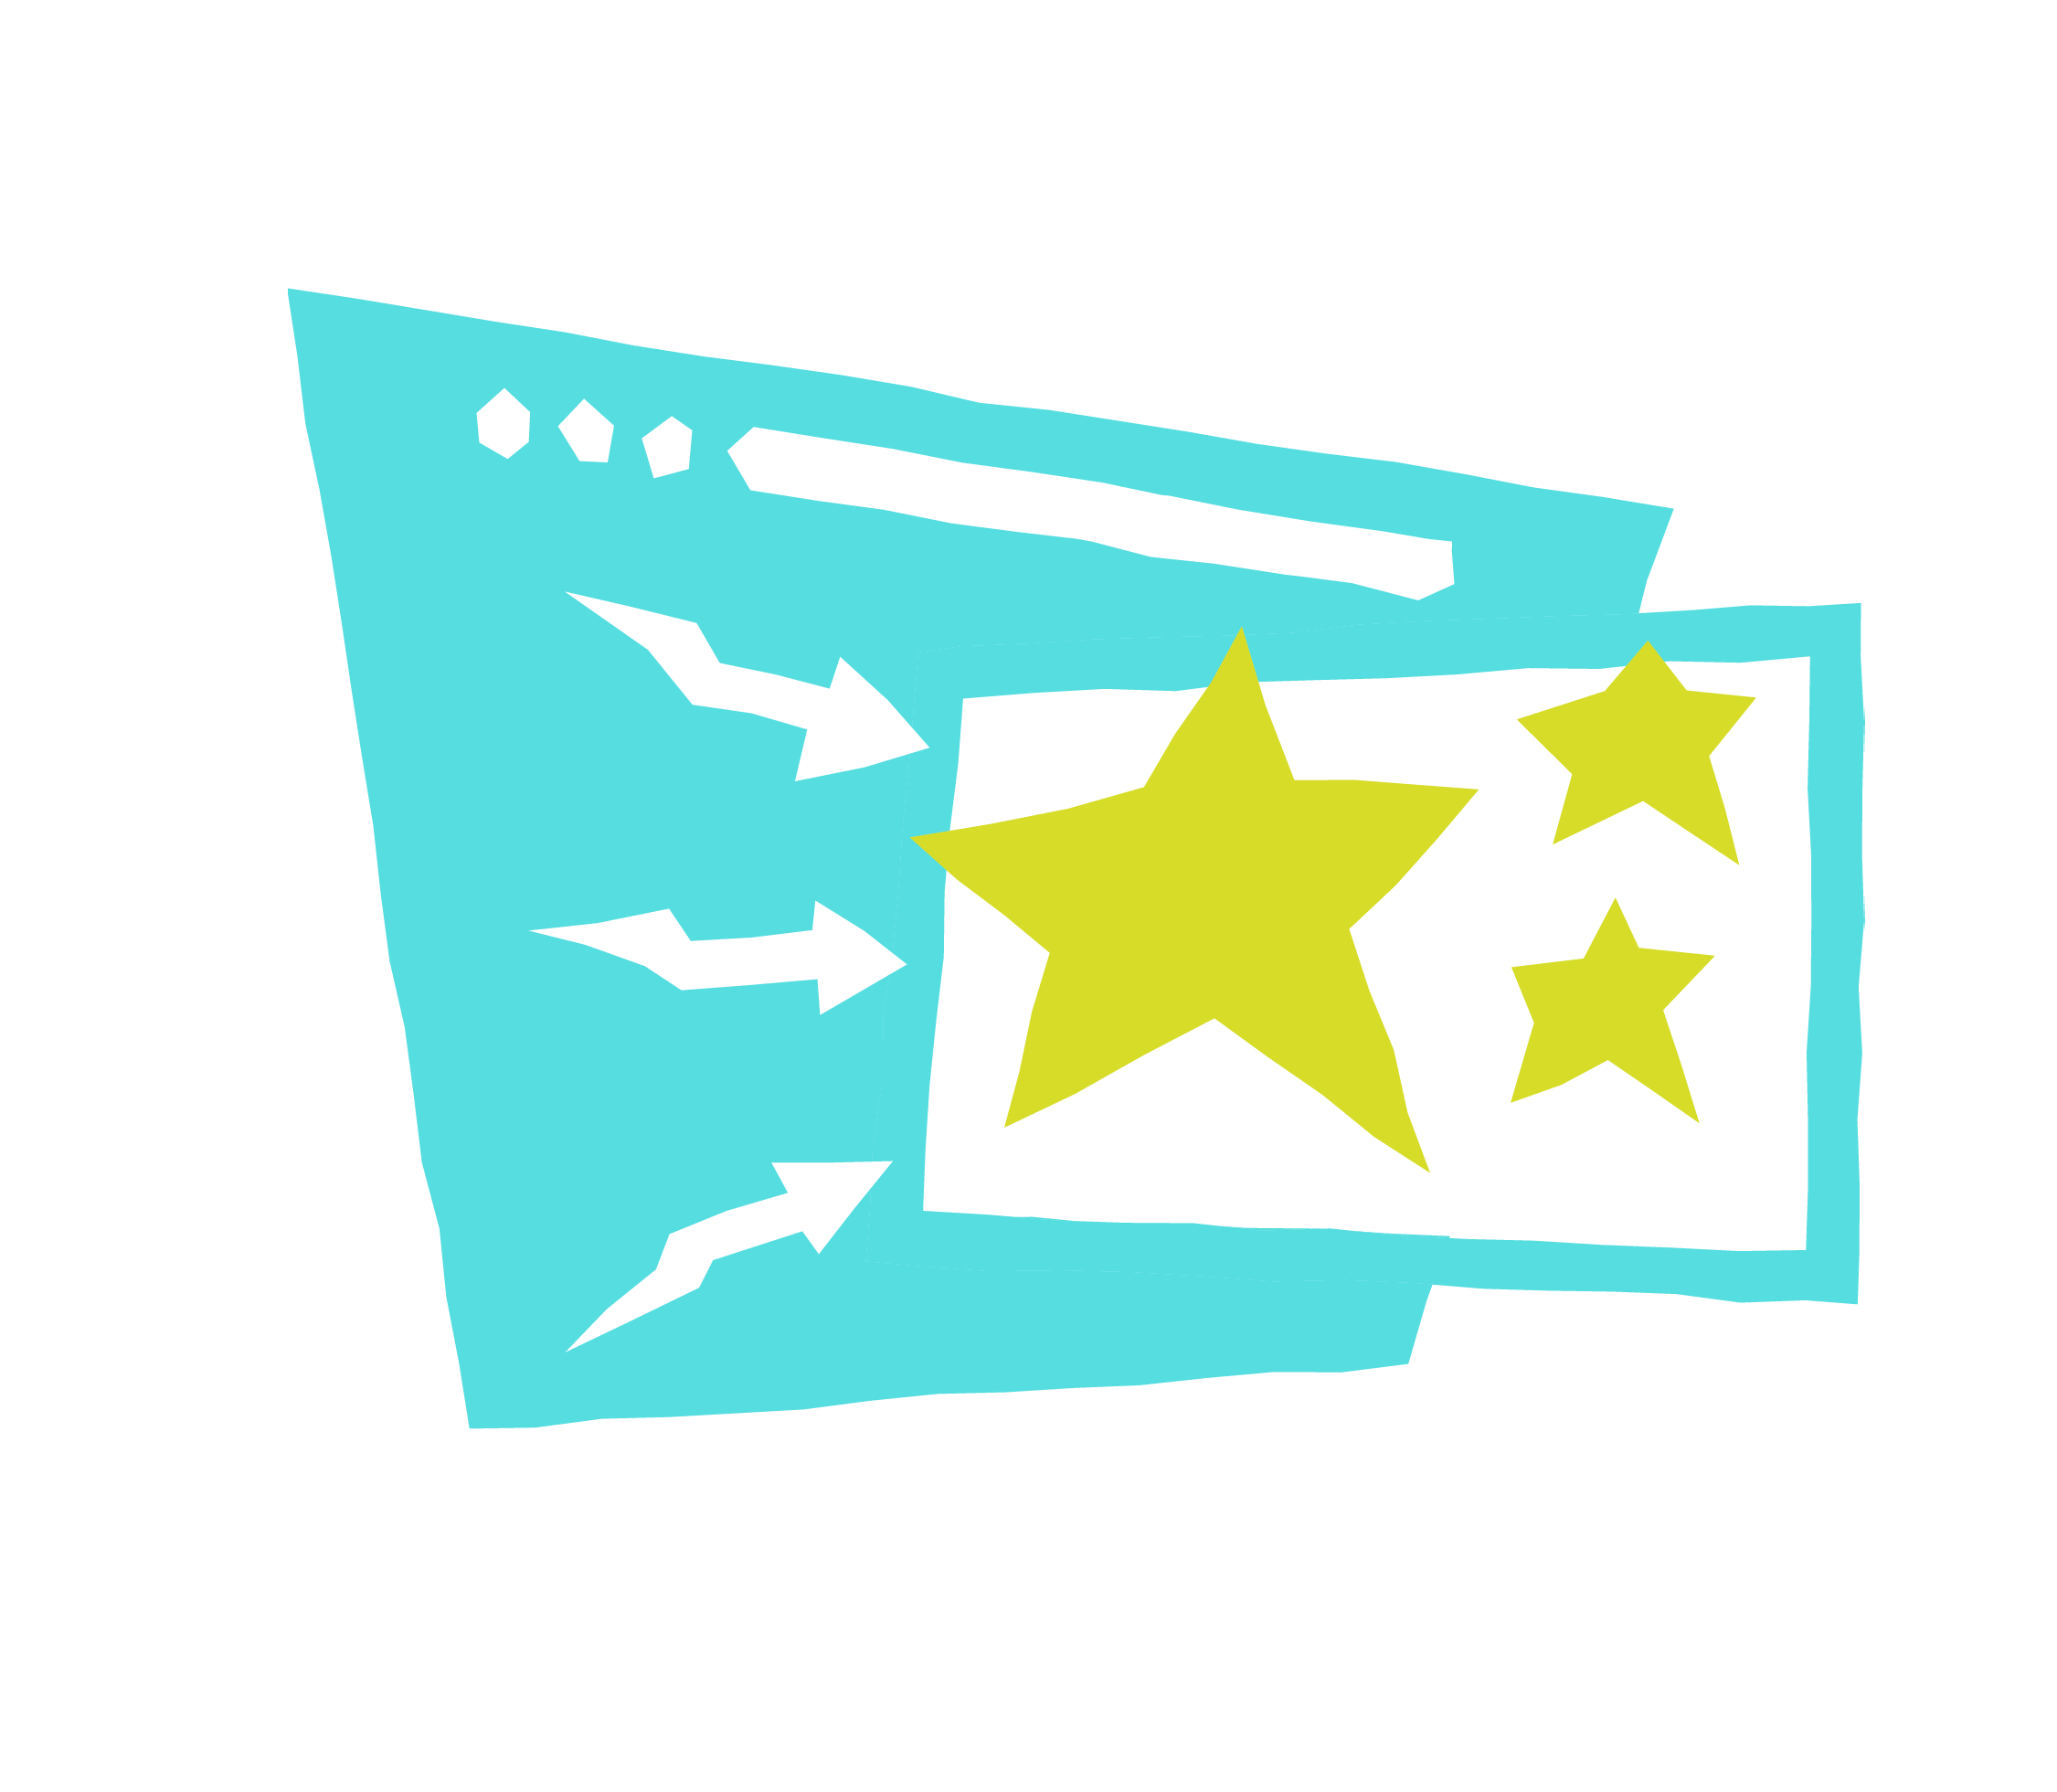 A Cartoon Mockup of a Web Browser With Stars Coming From The Screen